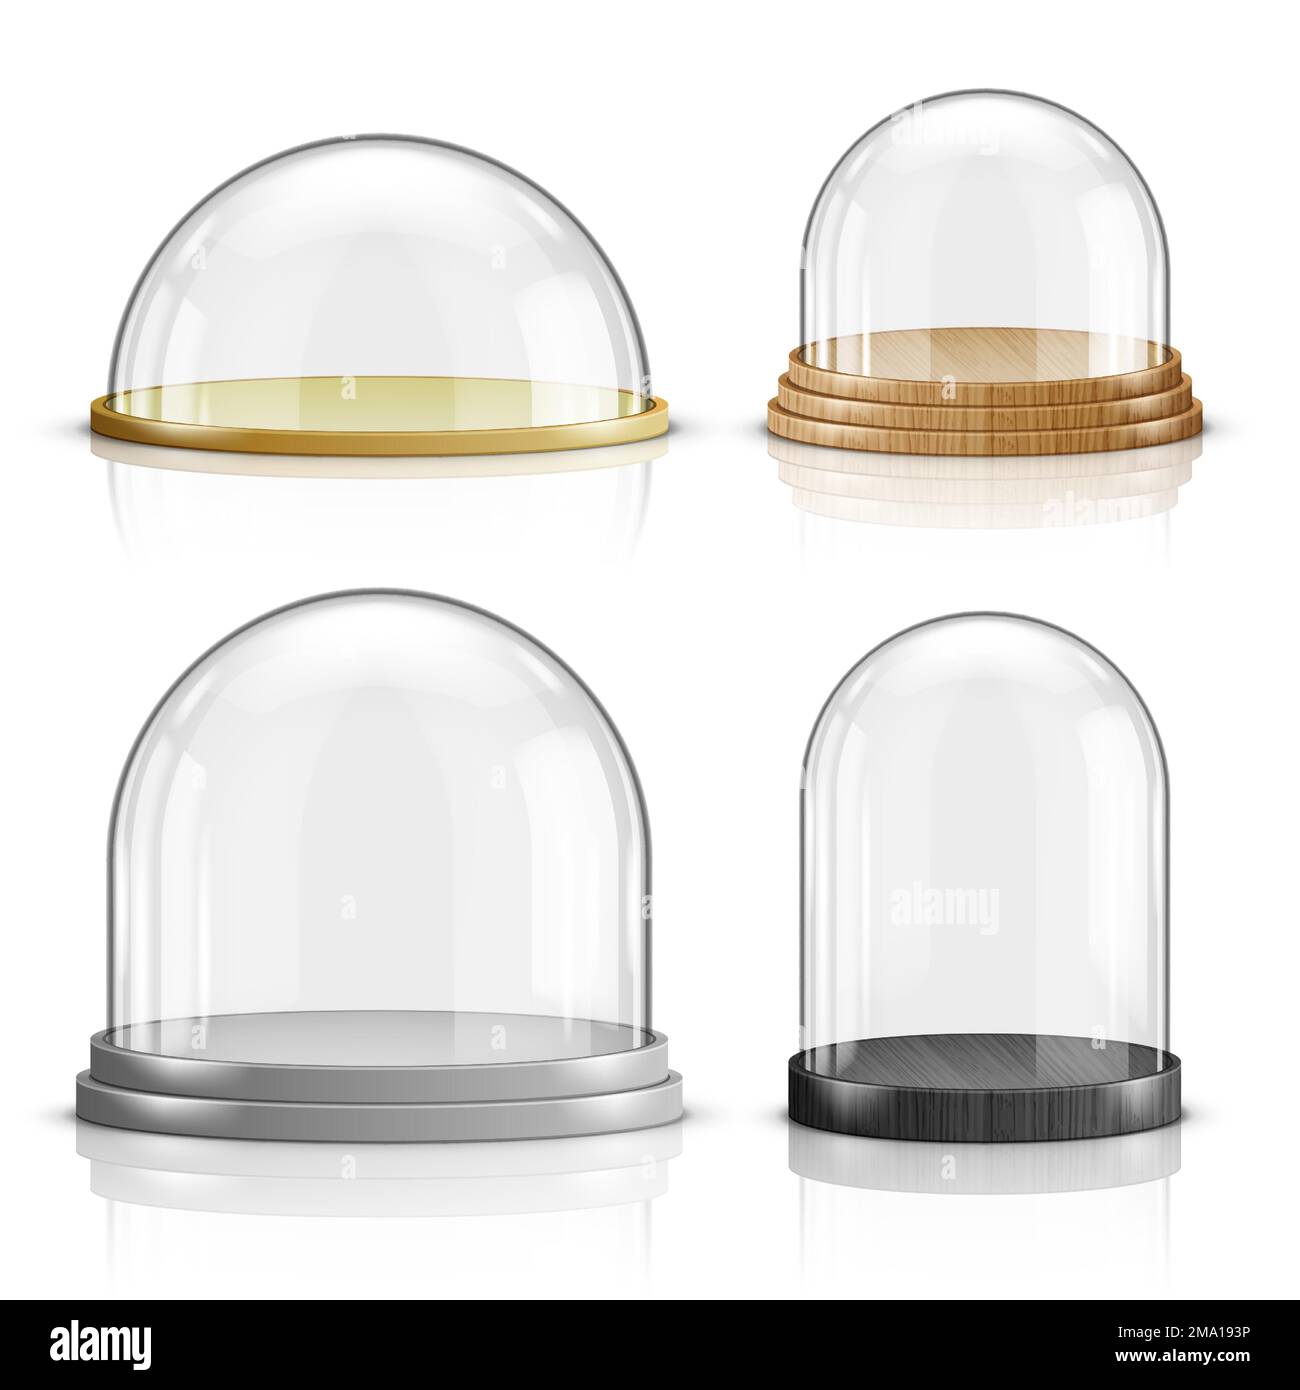 Glass dome and wooden and plastic tray realistic vector. Glass round dome of various shapes with plate, food storage container or product presentation case with reflection isolated on white background Stock Vector